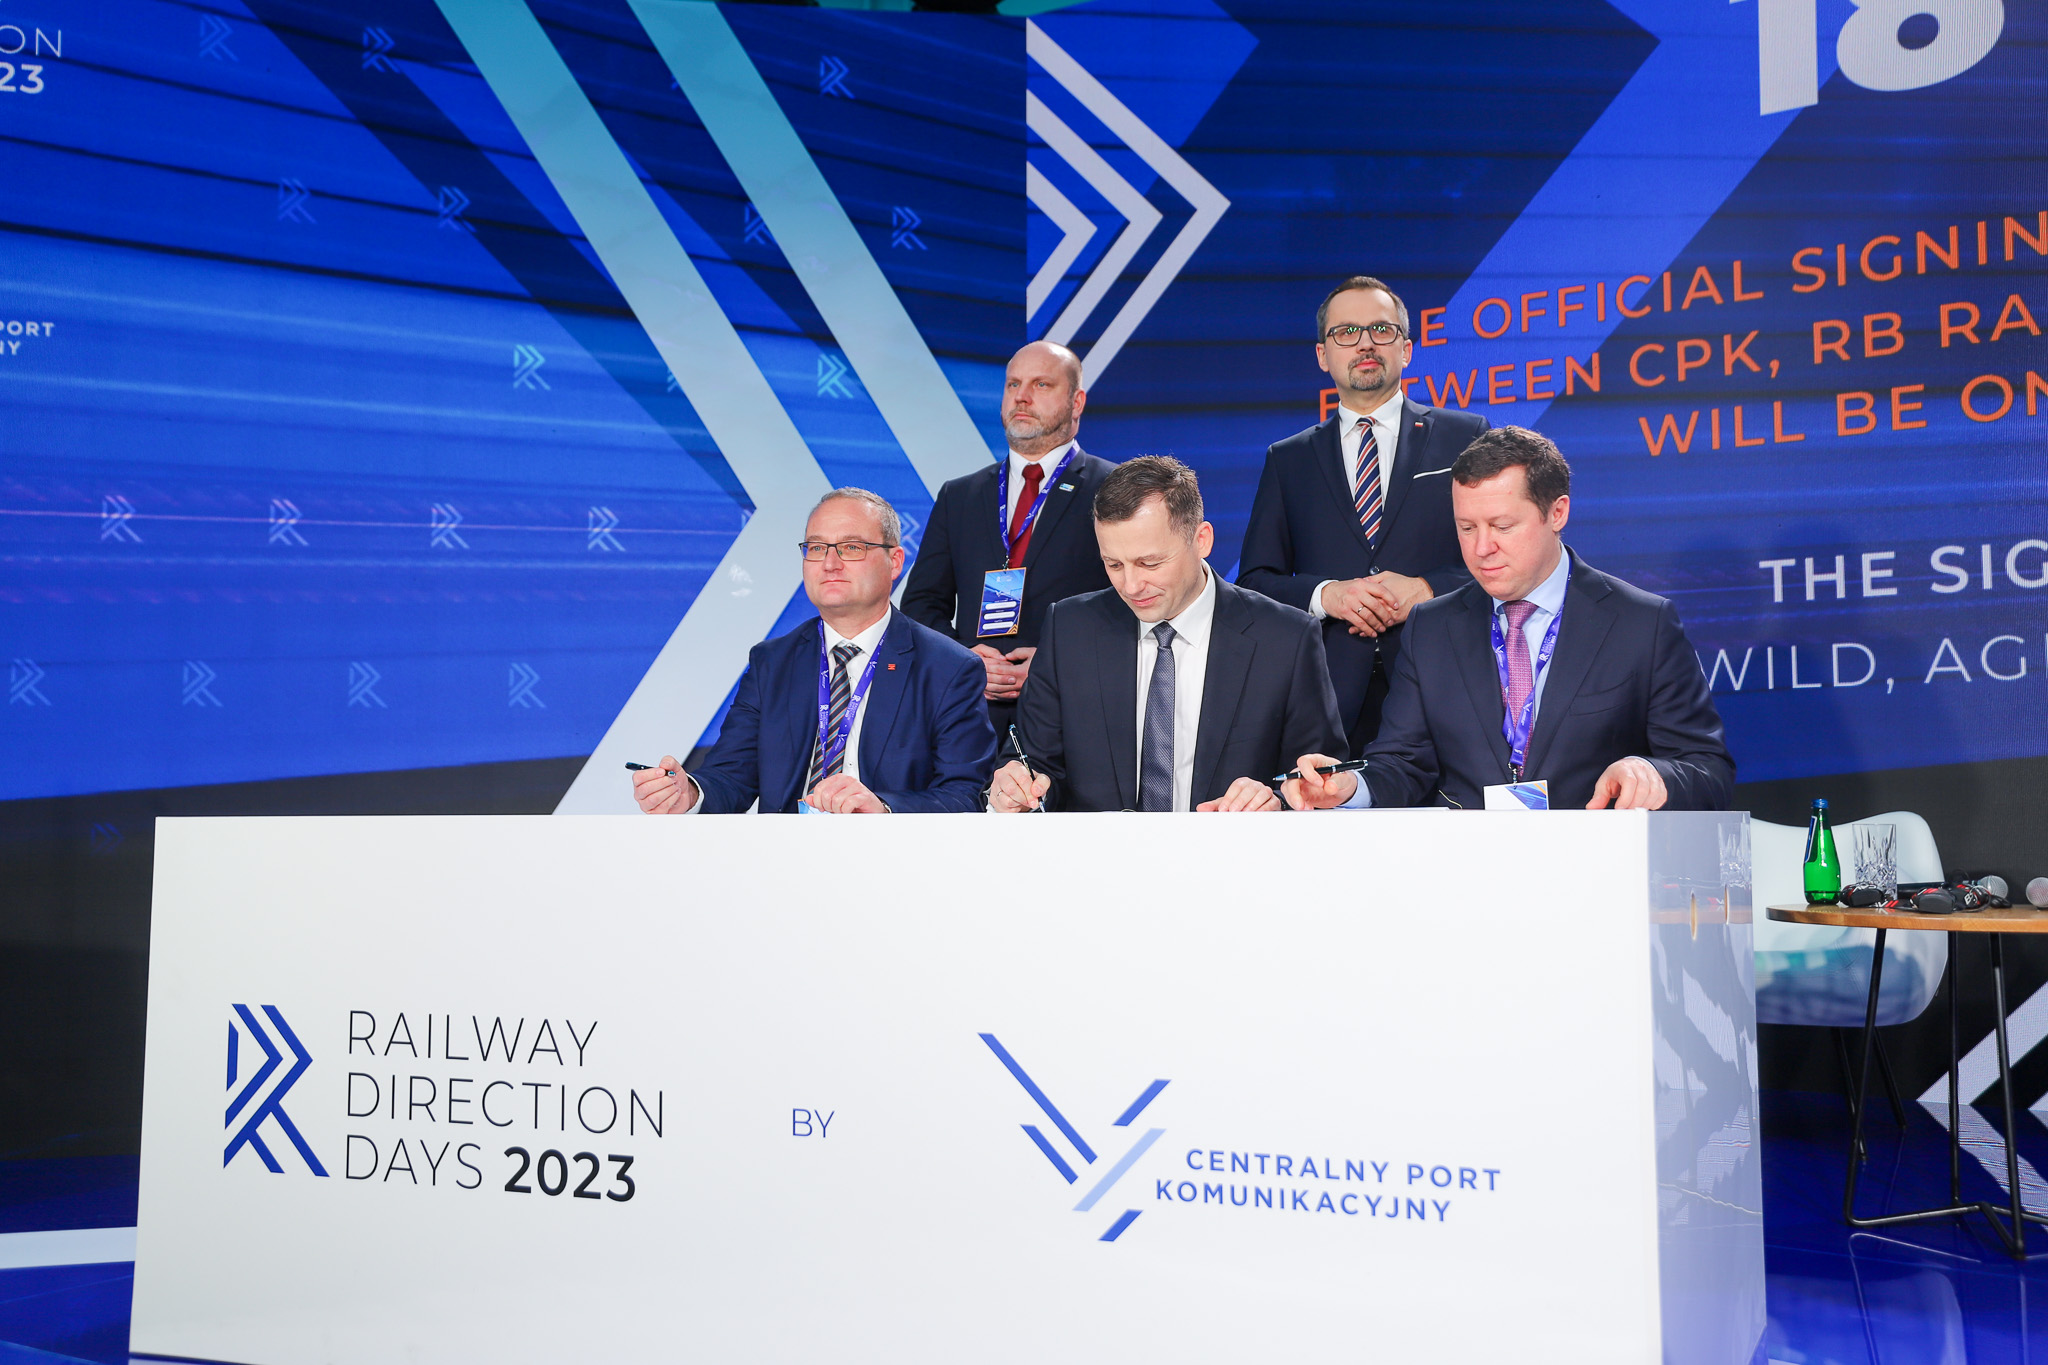 RB Rail,CPK and SZCZ signed a Memorandum of Understanding during the Railway Direction Days 2023 conference.